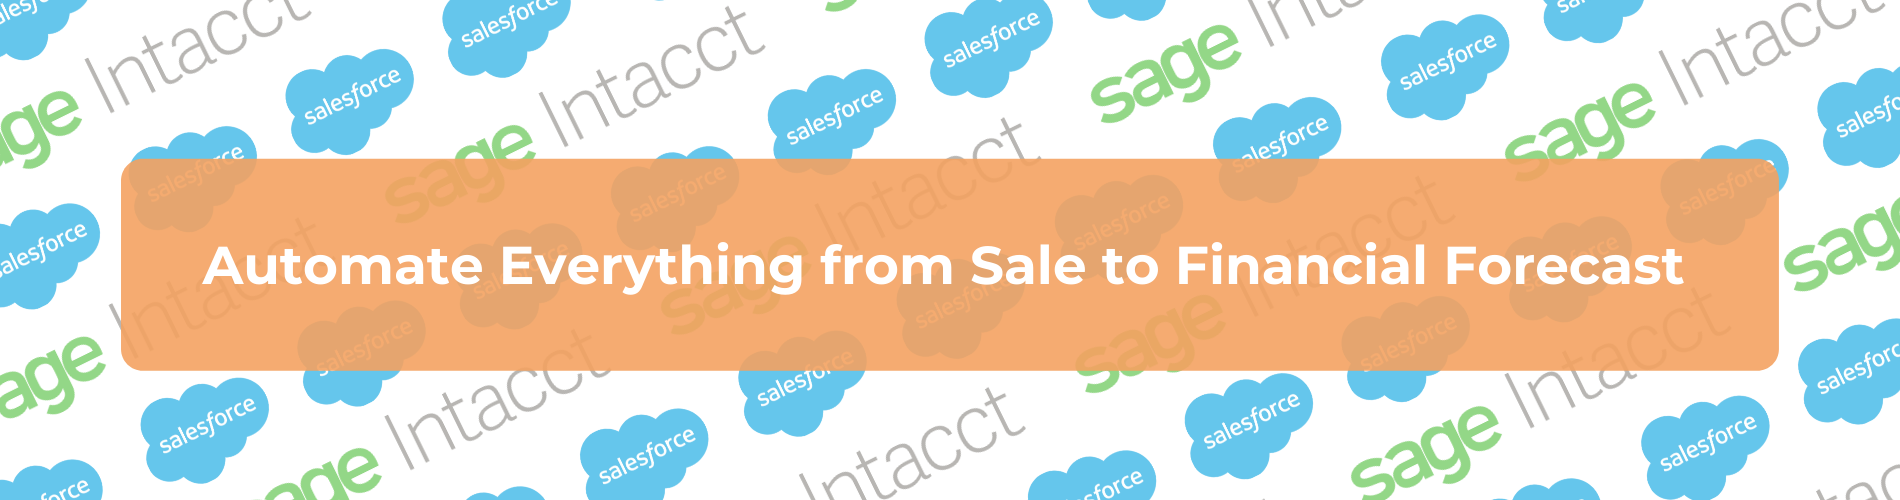 blog automate everything sale financial forecast header 2